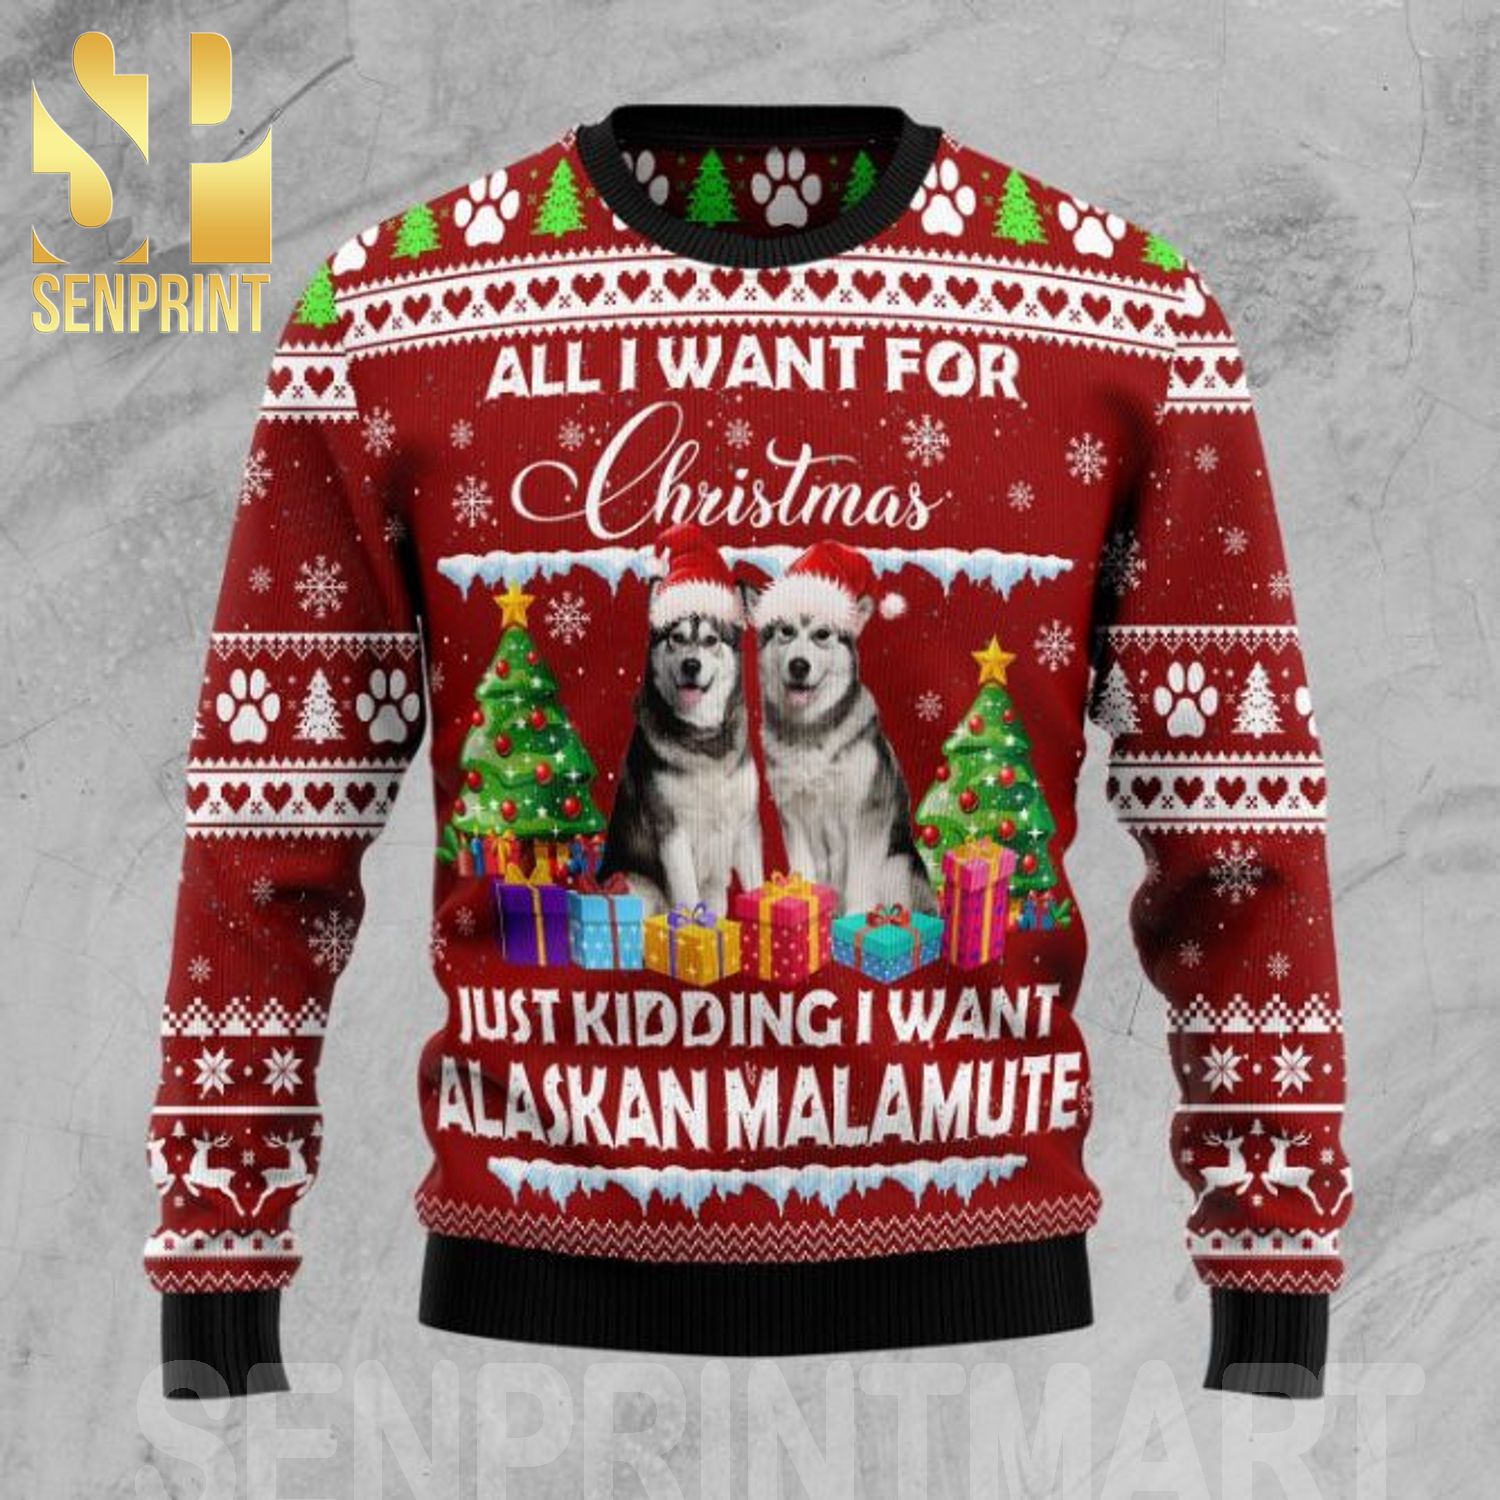 All I Want For Christmas Is Alaskan Malamute Ugly Christmas Wool Knitted Sweater